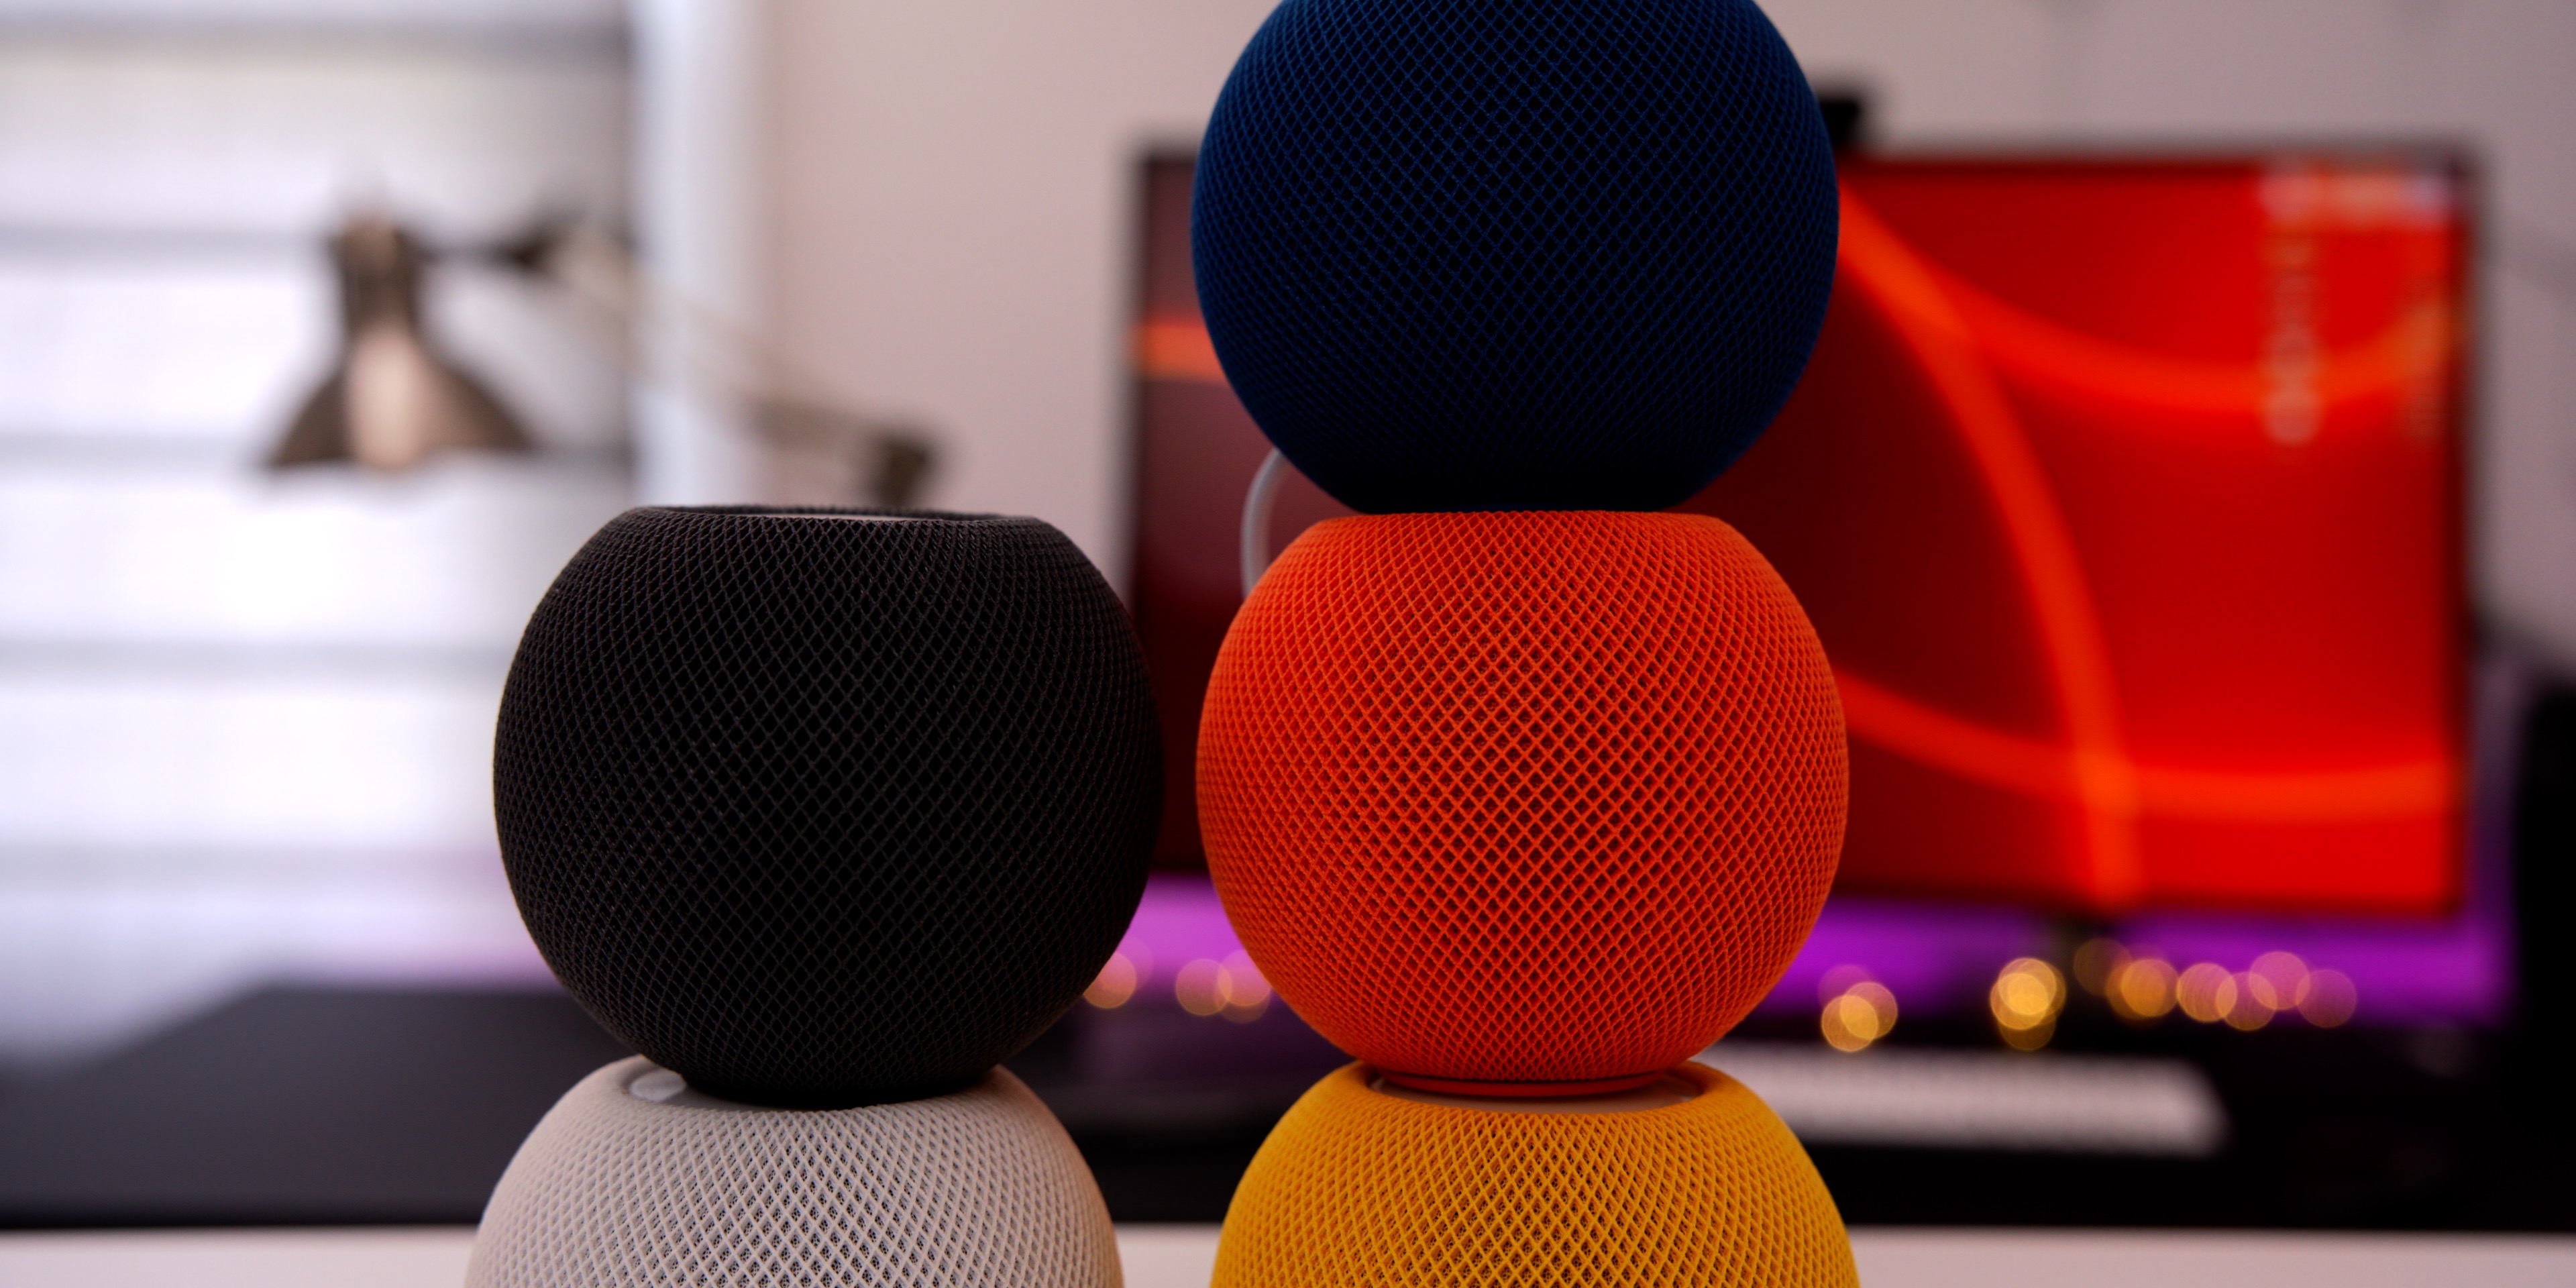 Latest HomePod update hints at imminent launch in Norway and Sweden